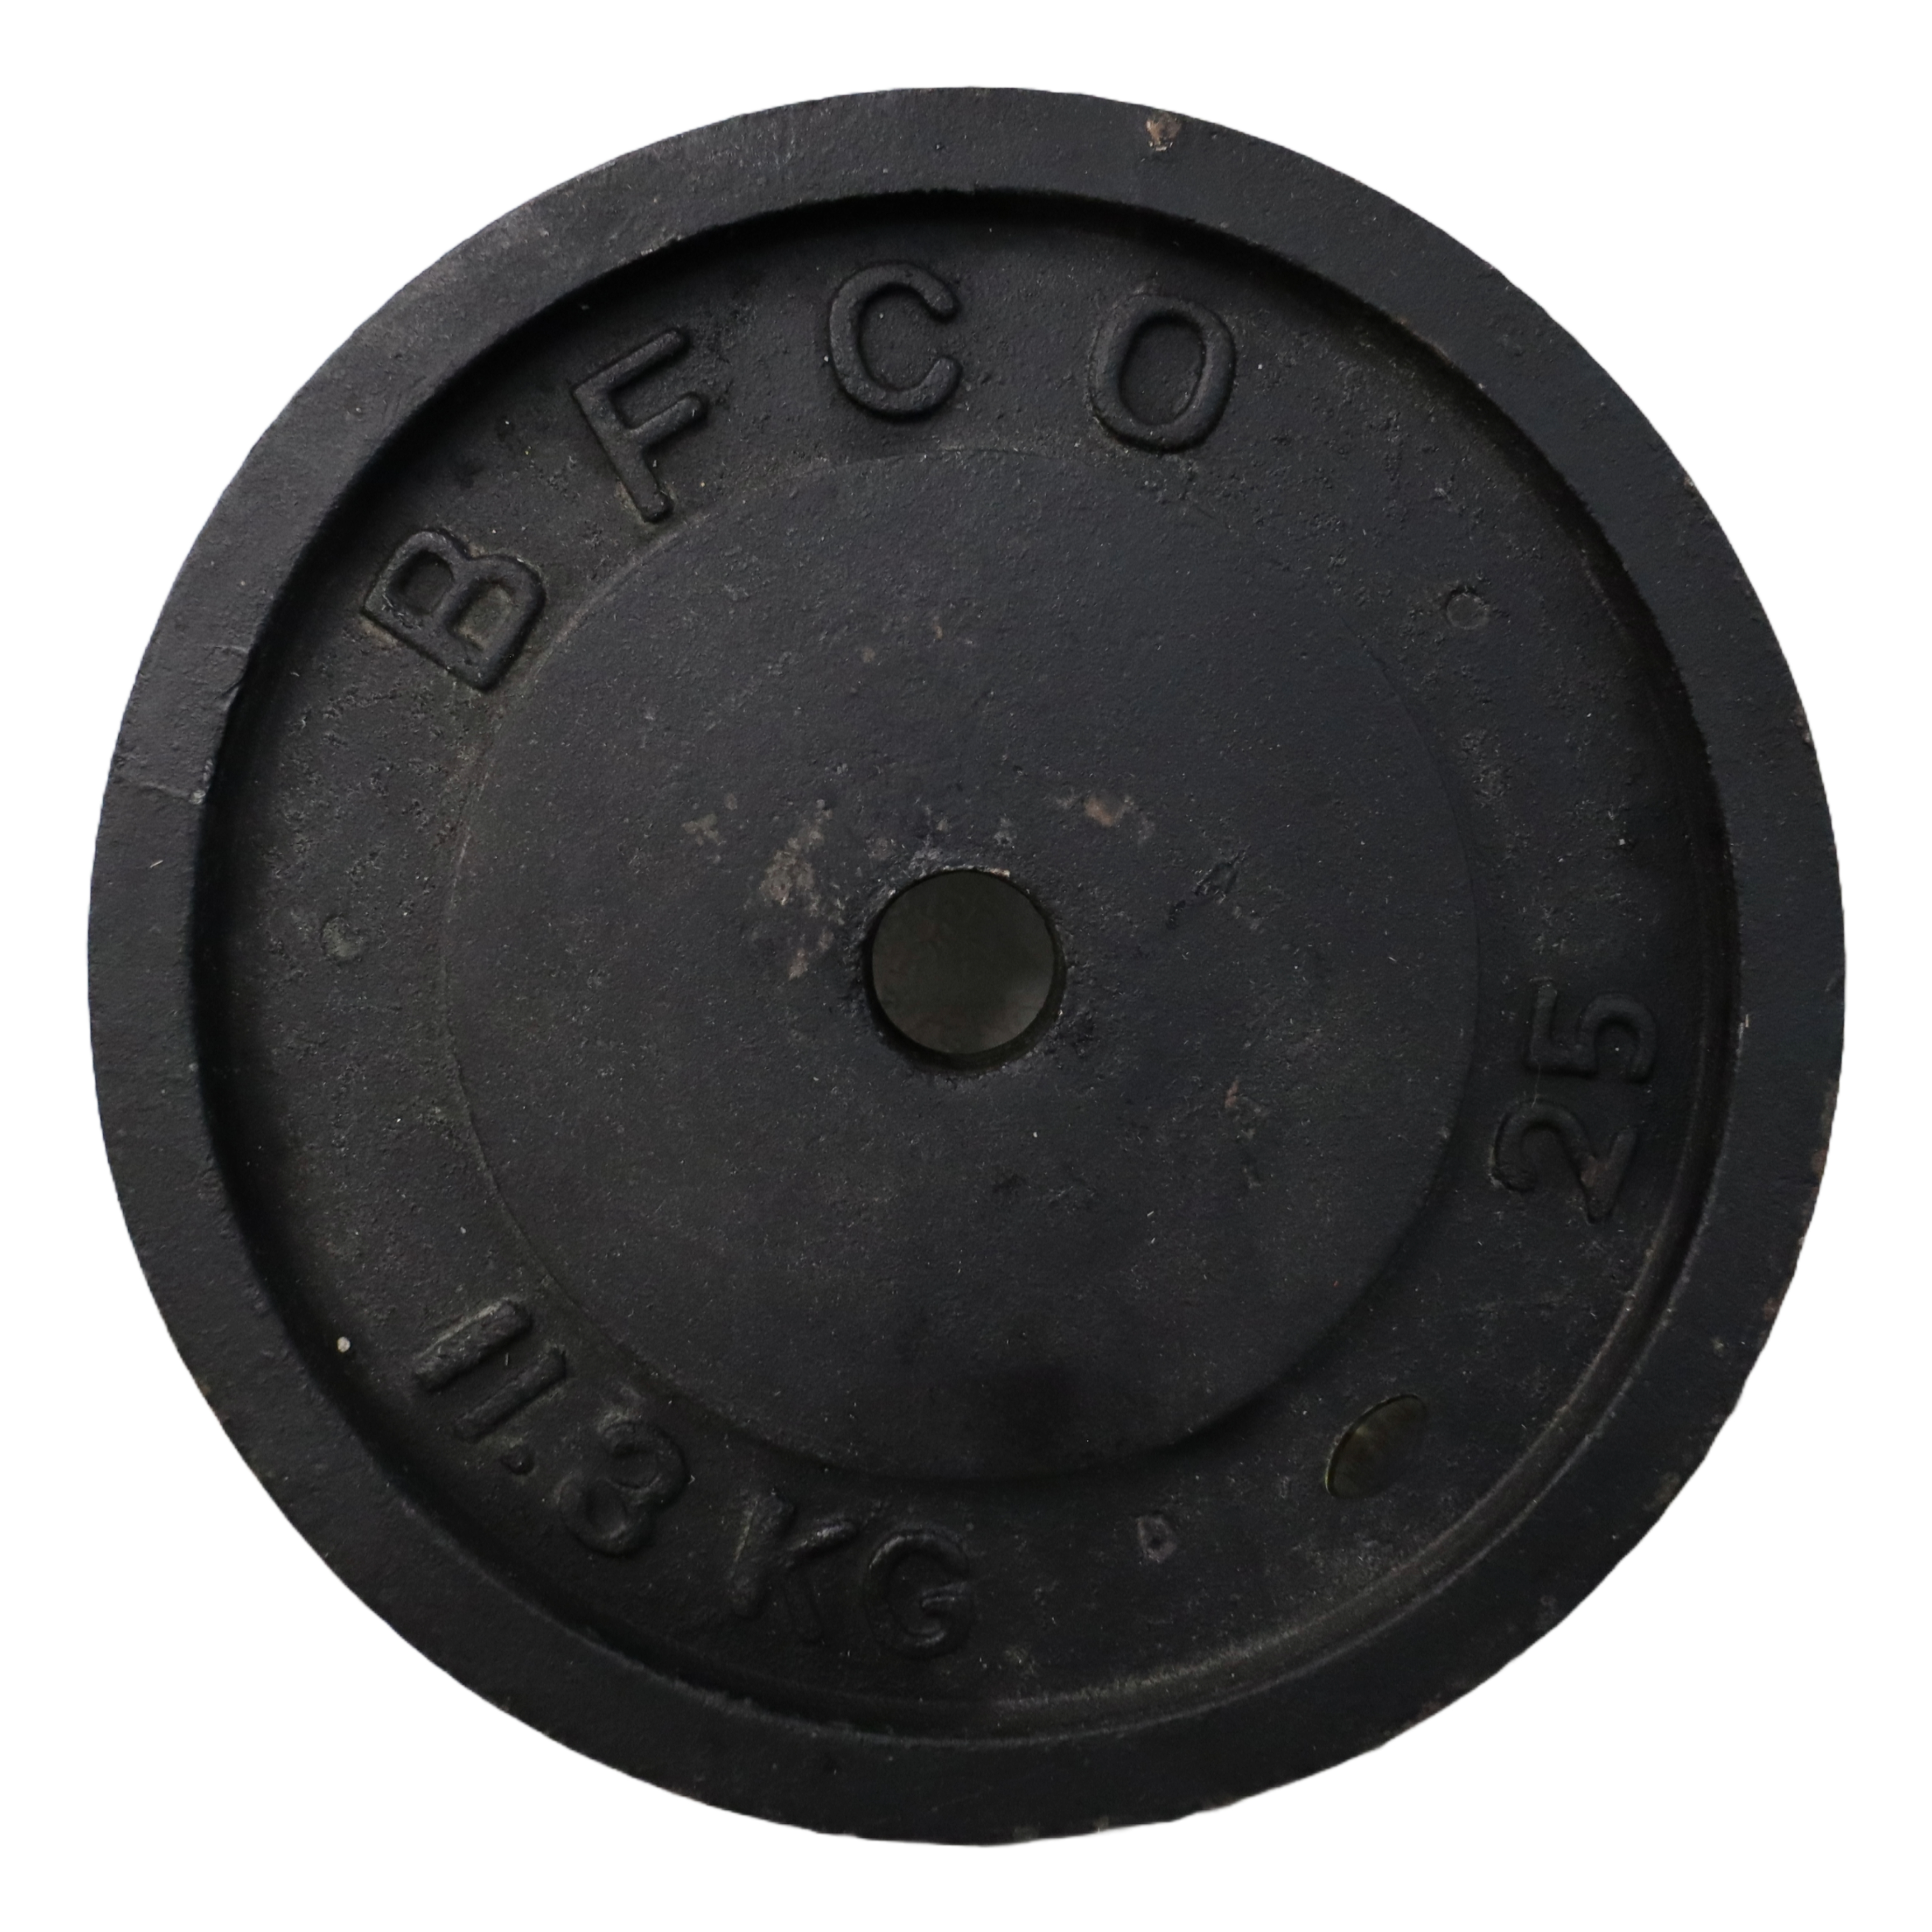 Used BFCO 25lb Standard Plate Weight Freeweights & Accessories